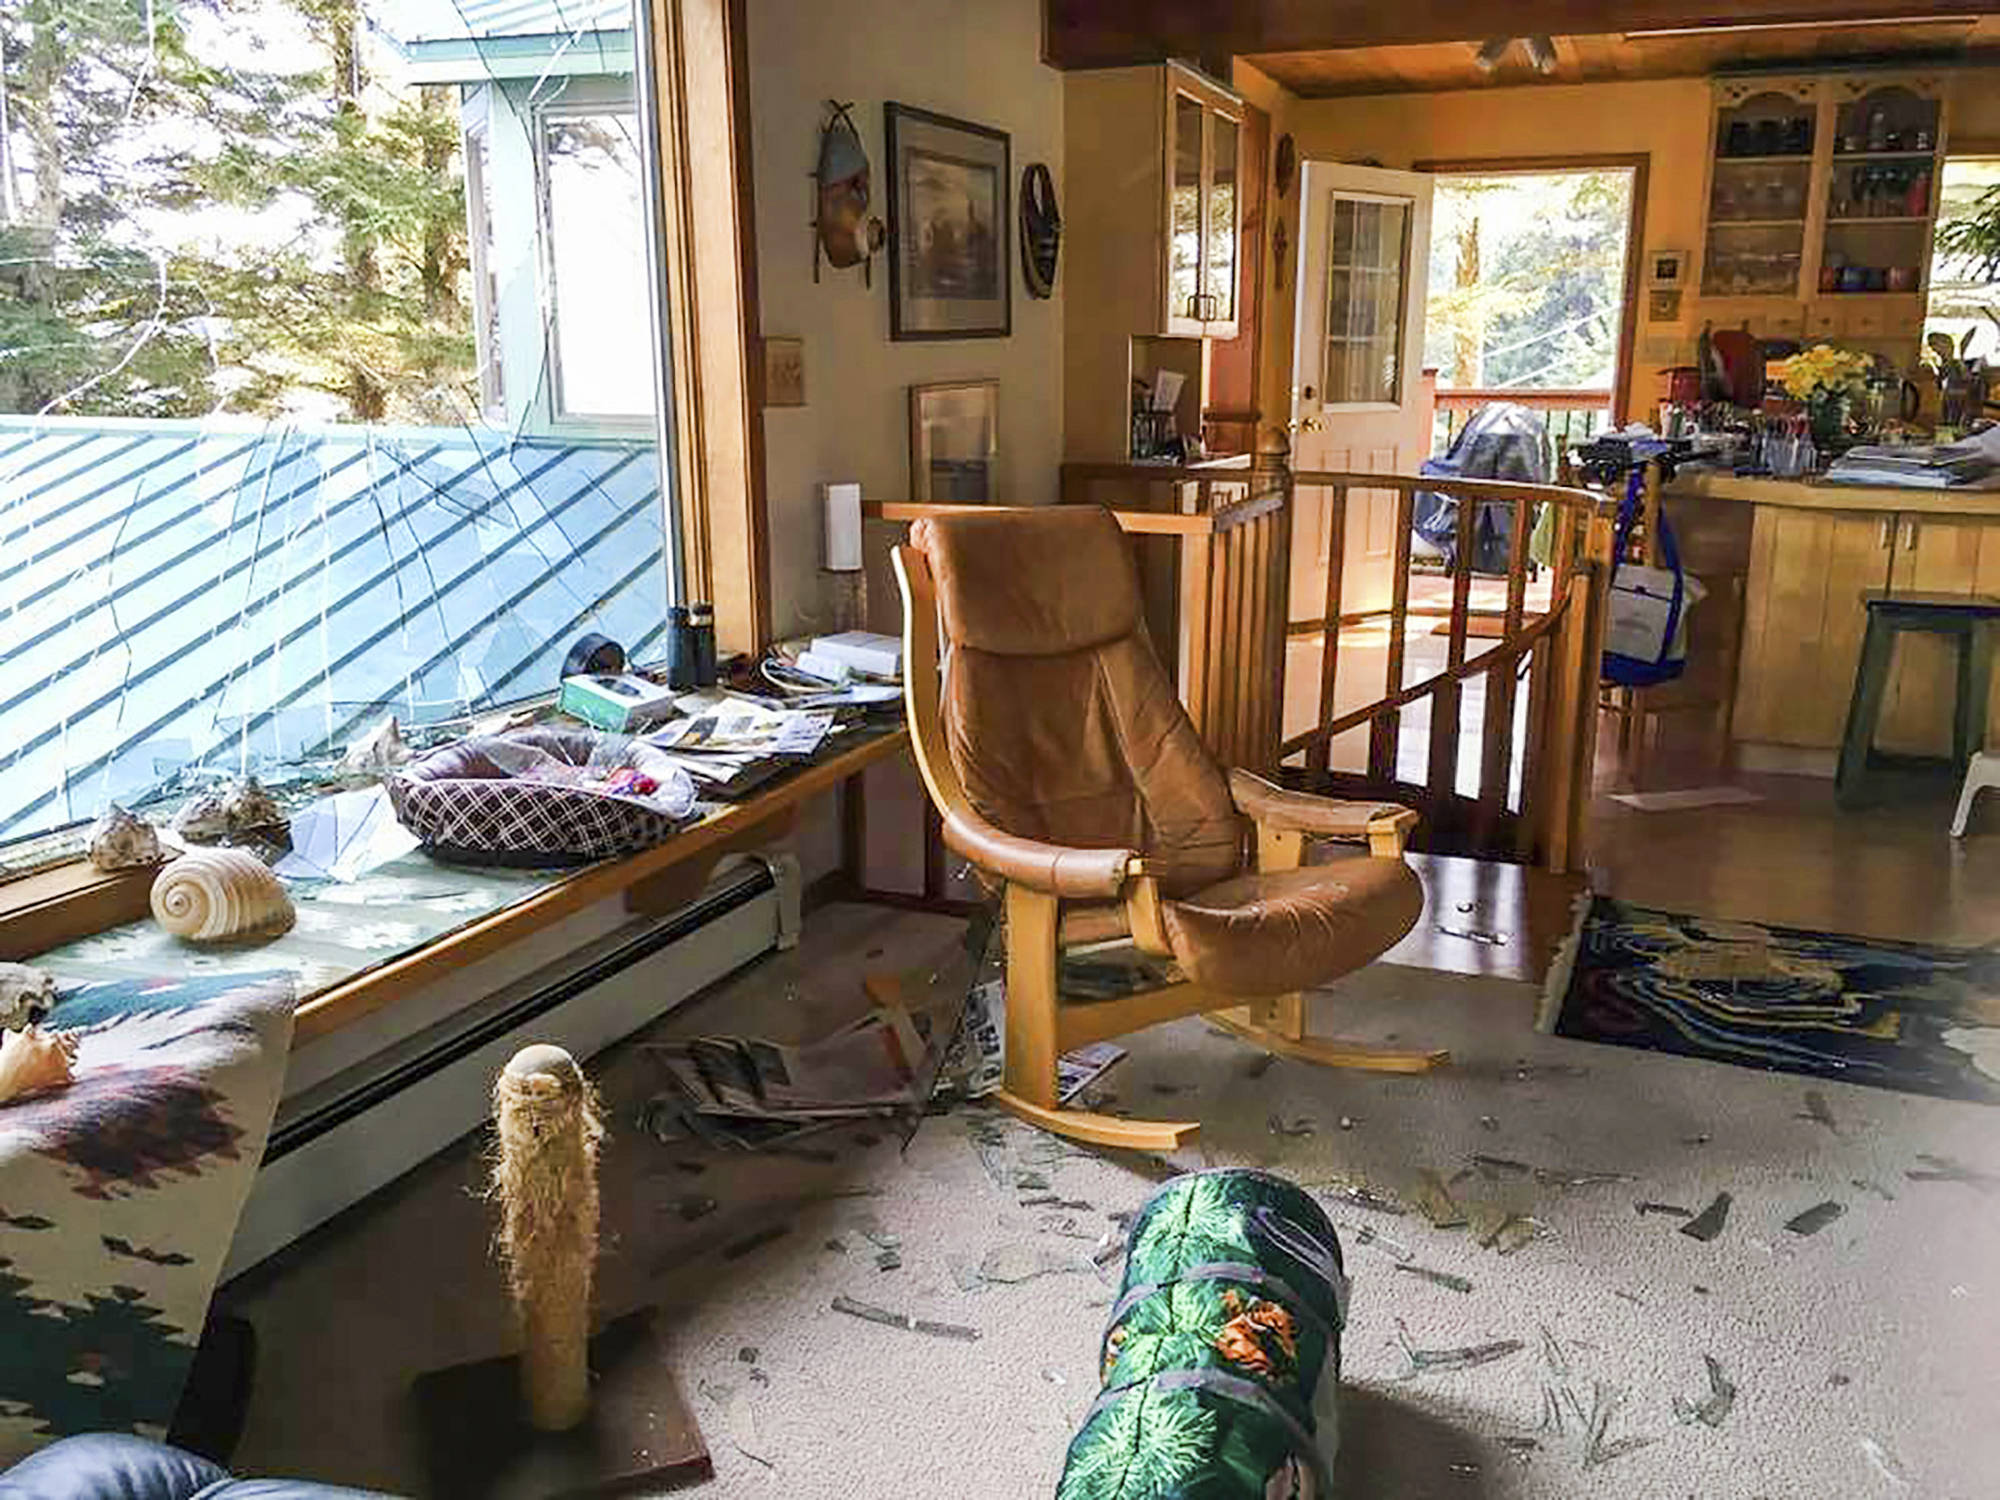 This May 4, 2019 photo shows extensive damage in the living room area of Stacy Studebaker’s home in Kodiak, Alaska, after an eagle flew through a large window. (Stacy Studebaker)